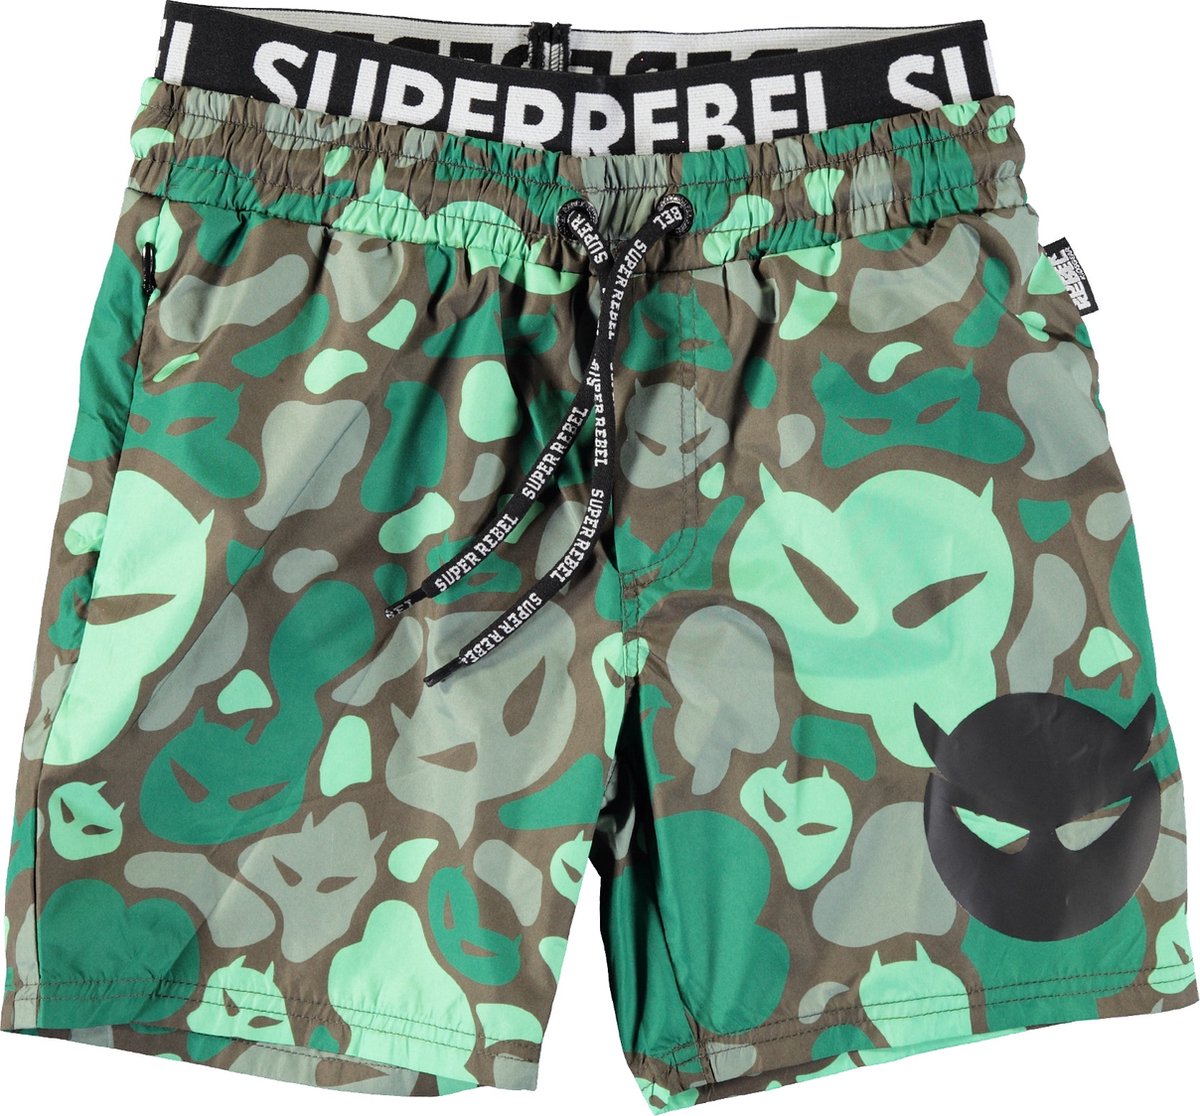 ROCKY. Swimshort - Camou Army print - 16/176